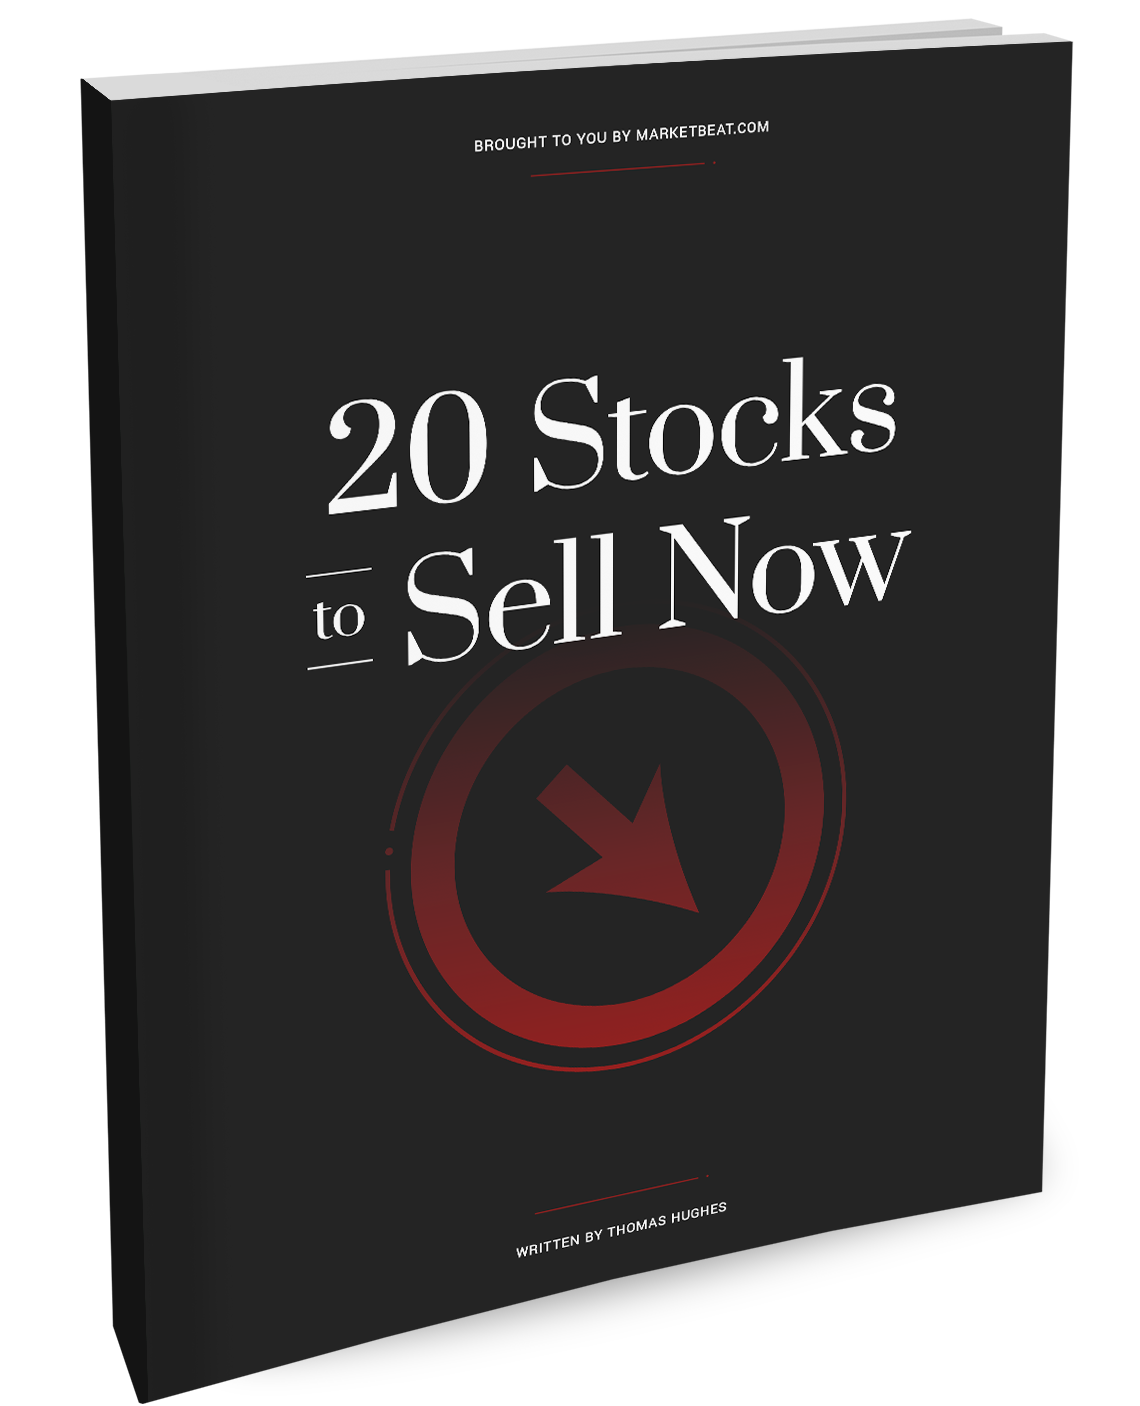 20 stocks to sell cover now